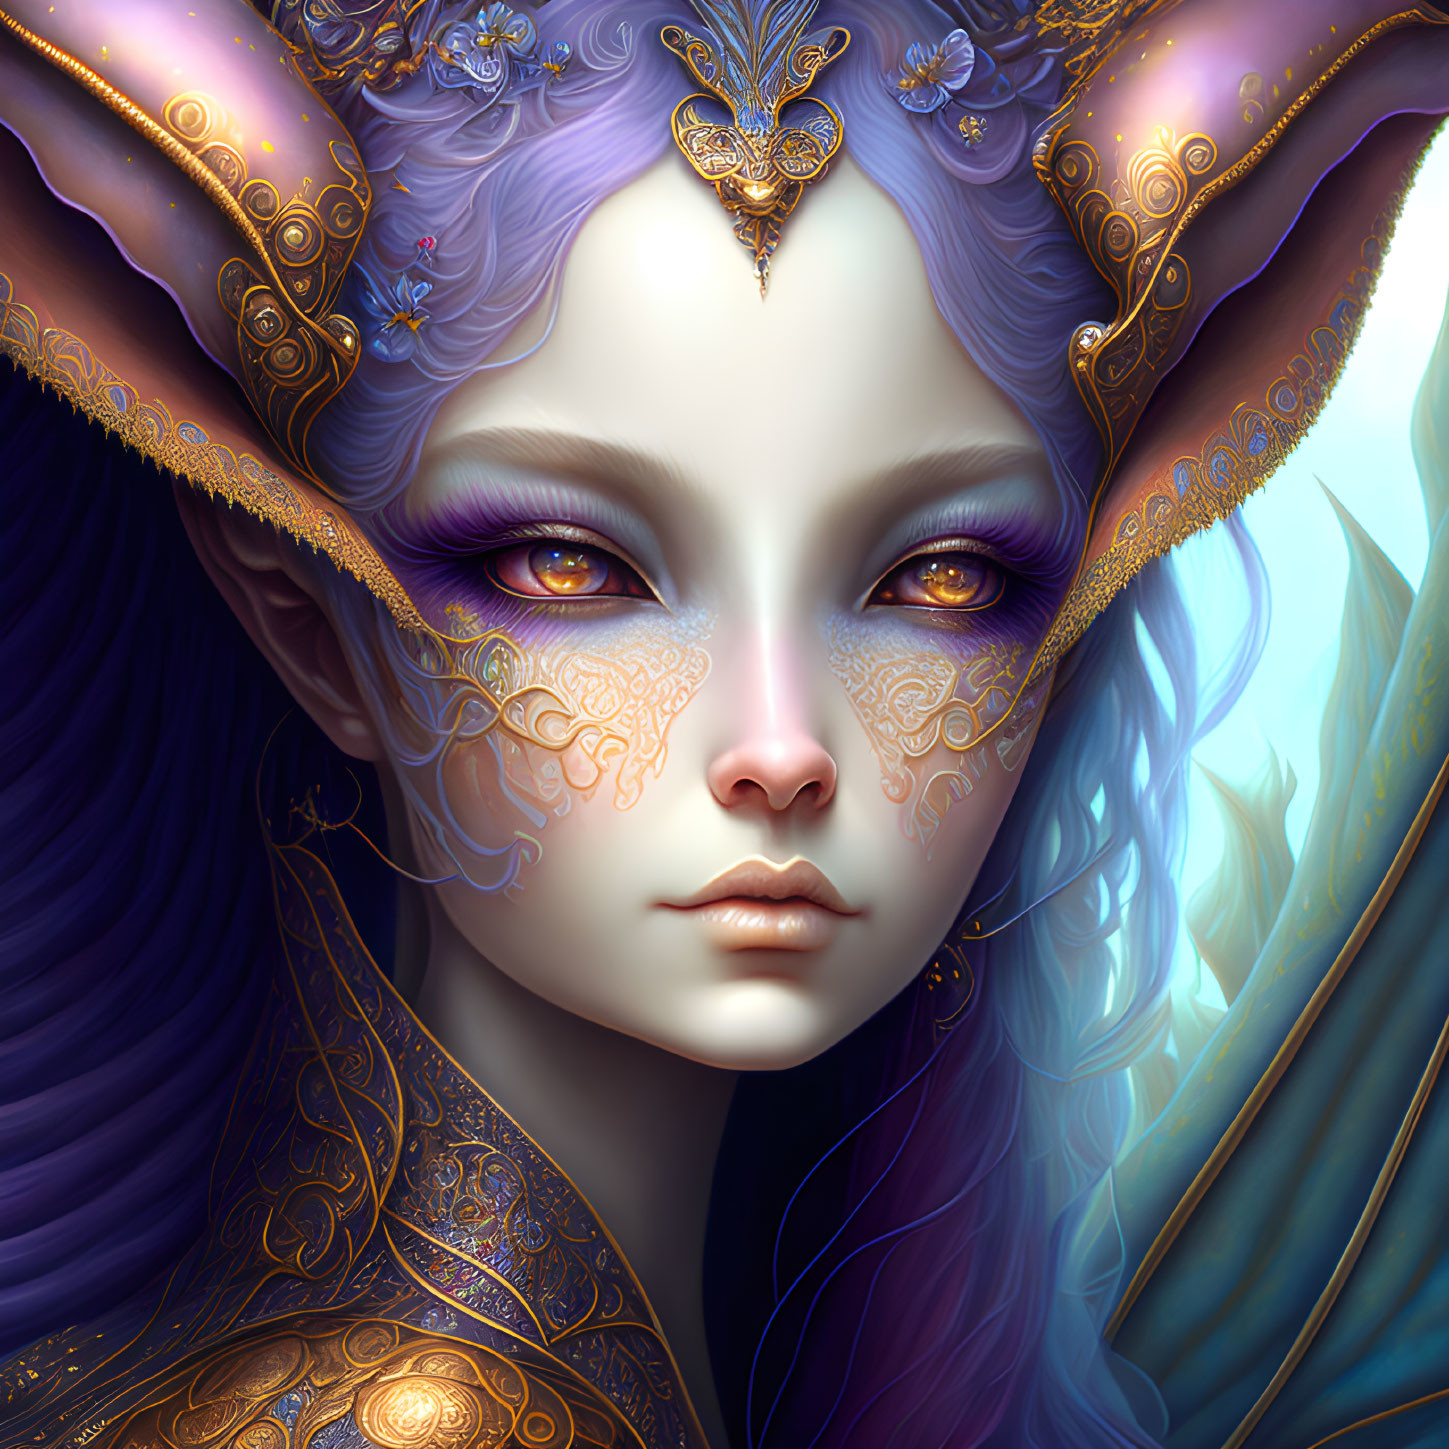 Fantasy character with purple hair, gold-trimmed ears, and mystical mask.